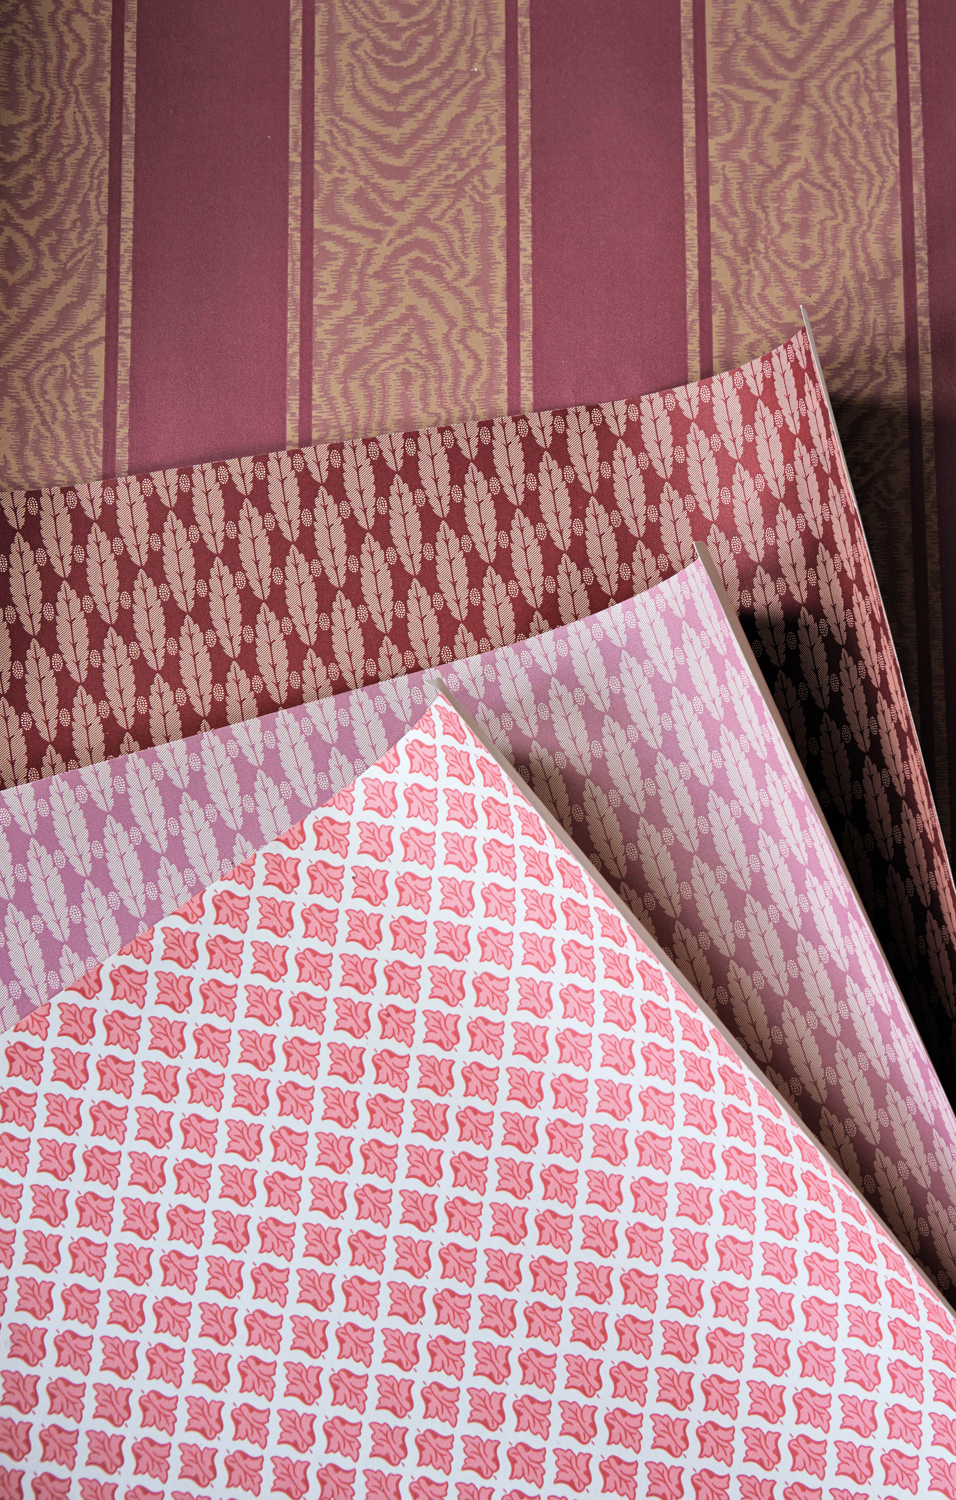 Four different pink patterned wallpaper samples